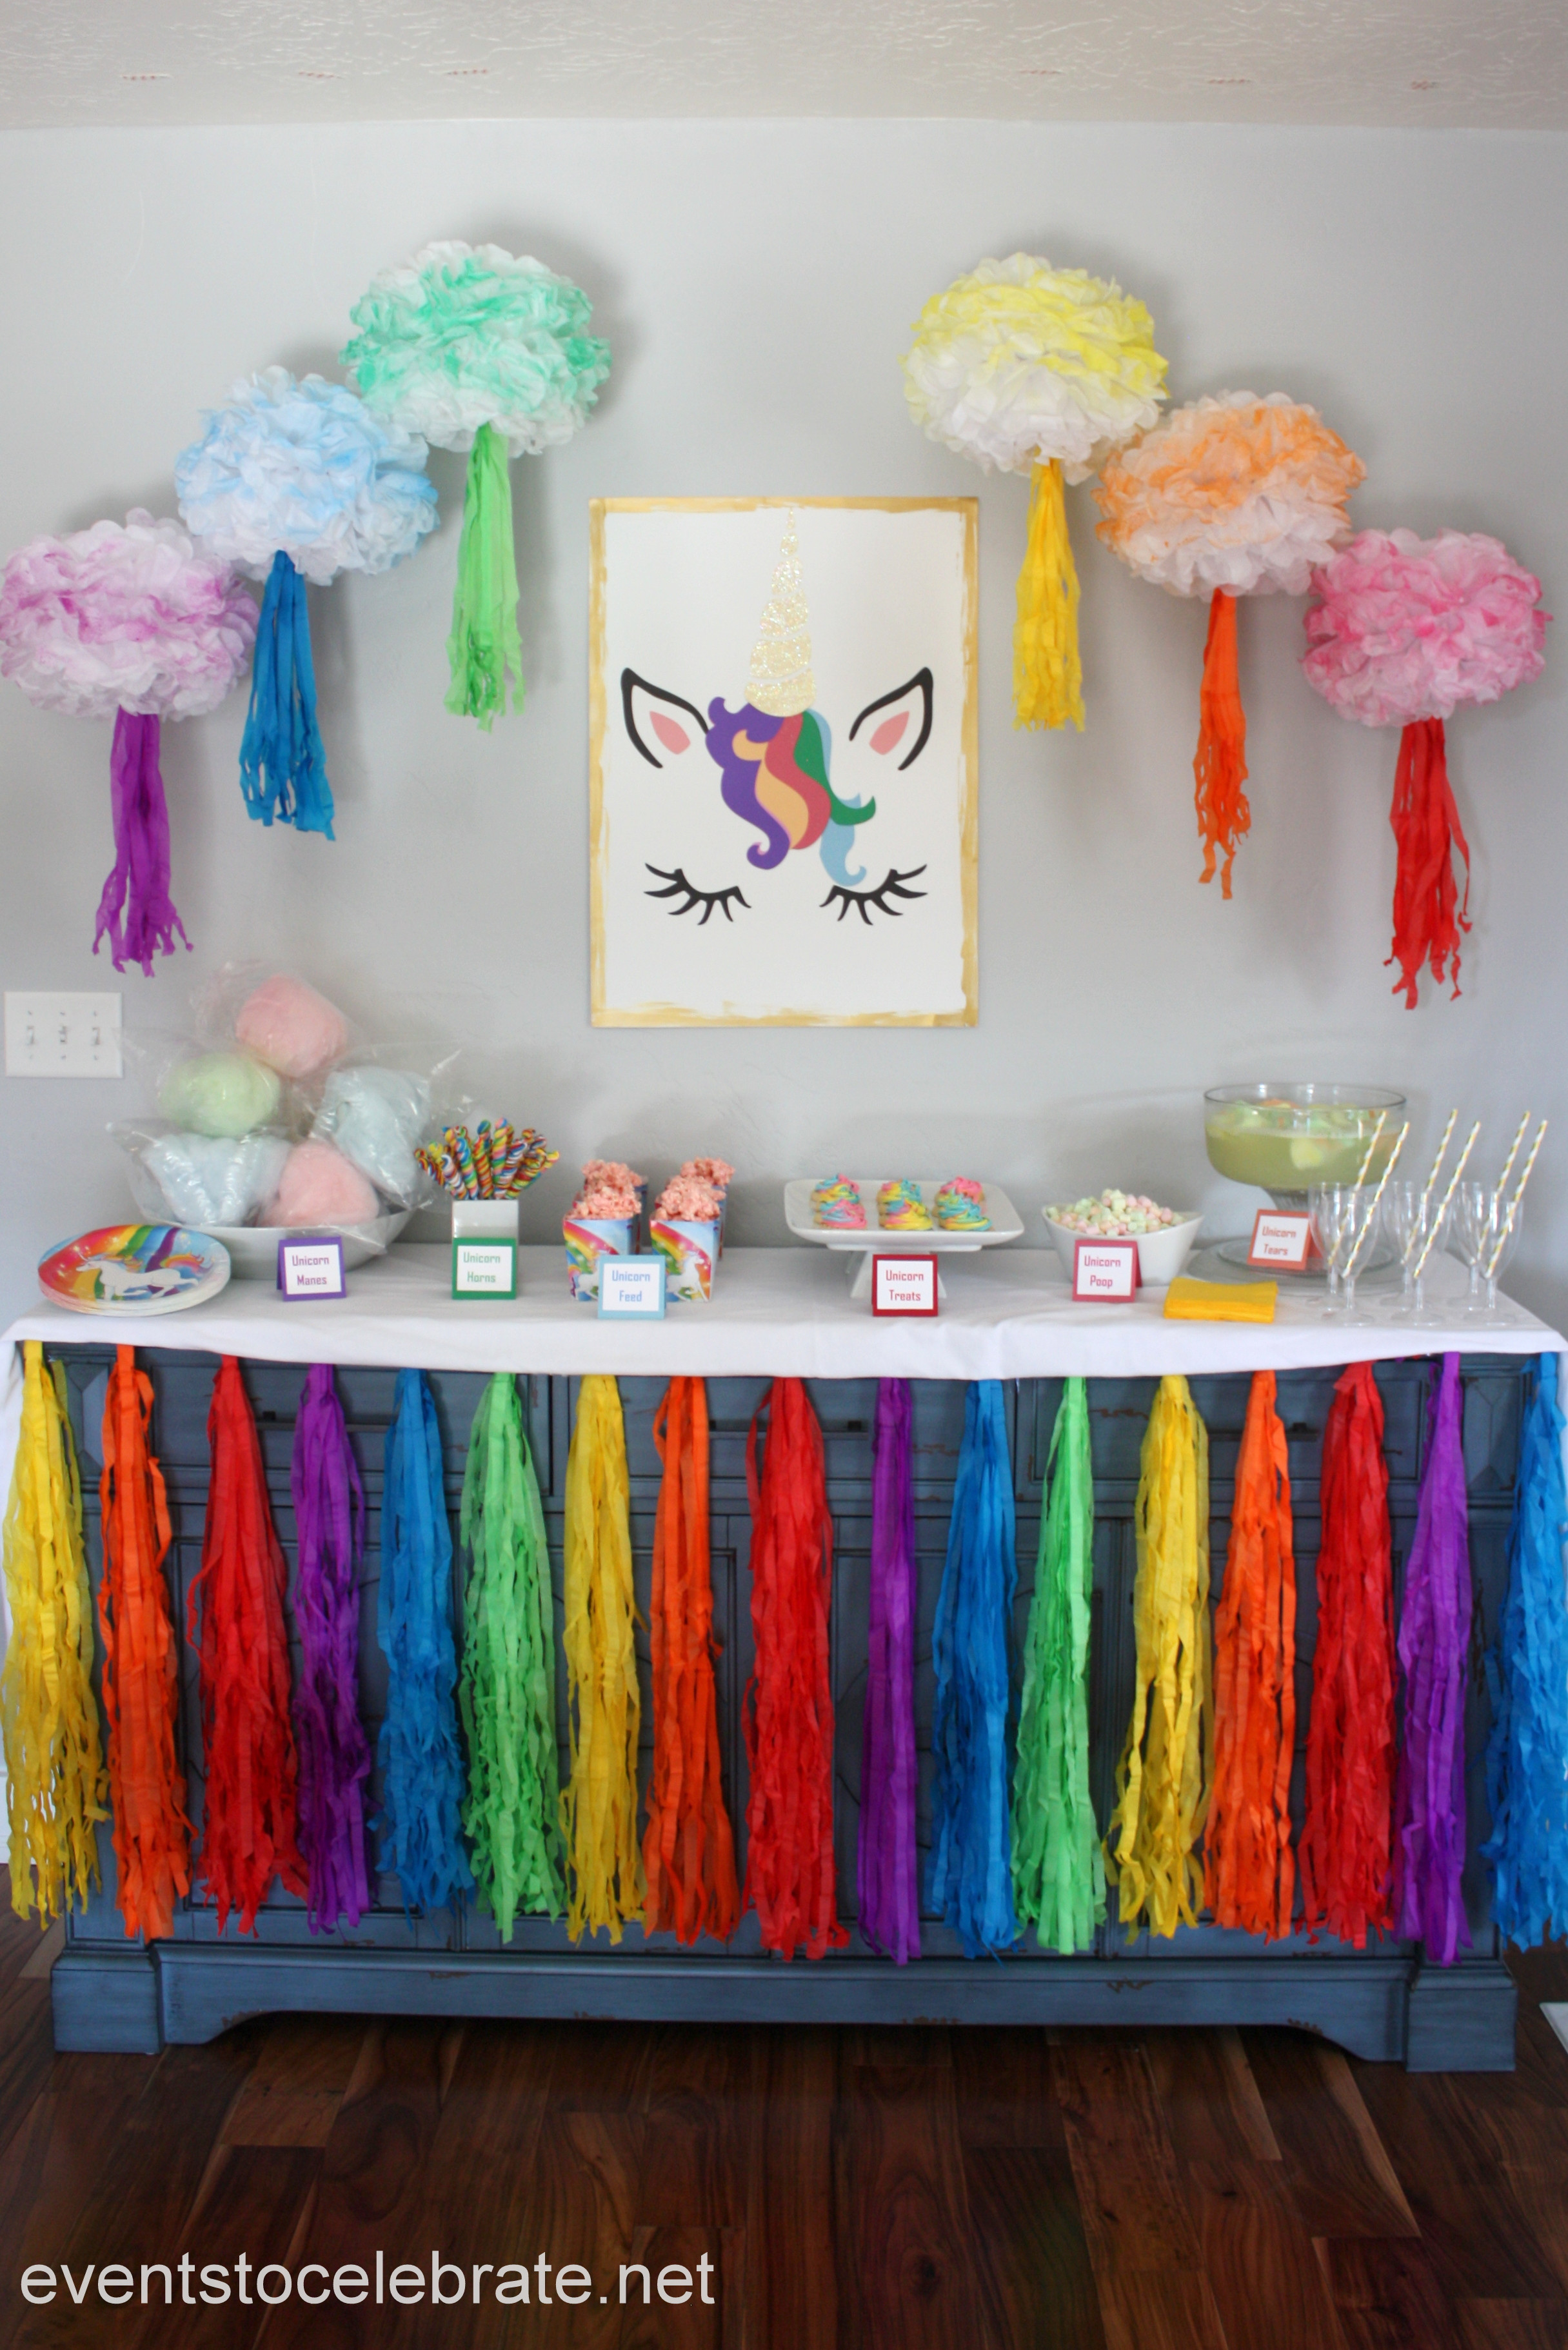 Unicorn Party Decoration Ideas
 Unicorn Party Decorations and Food events to CELEBRATE